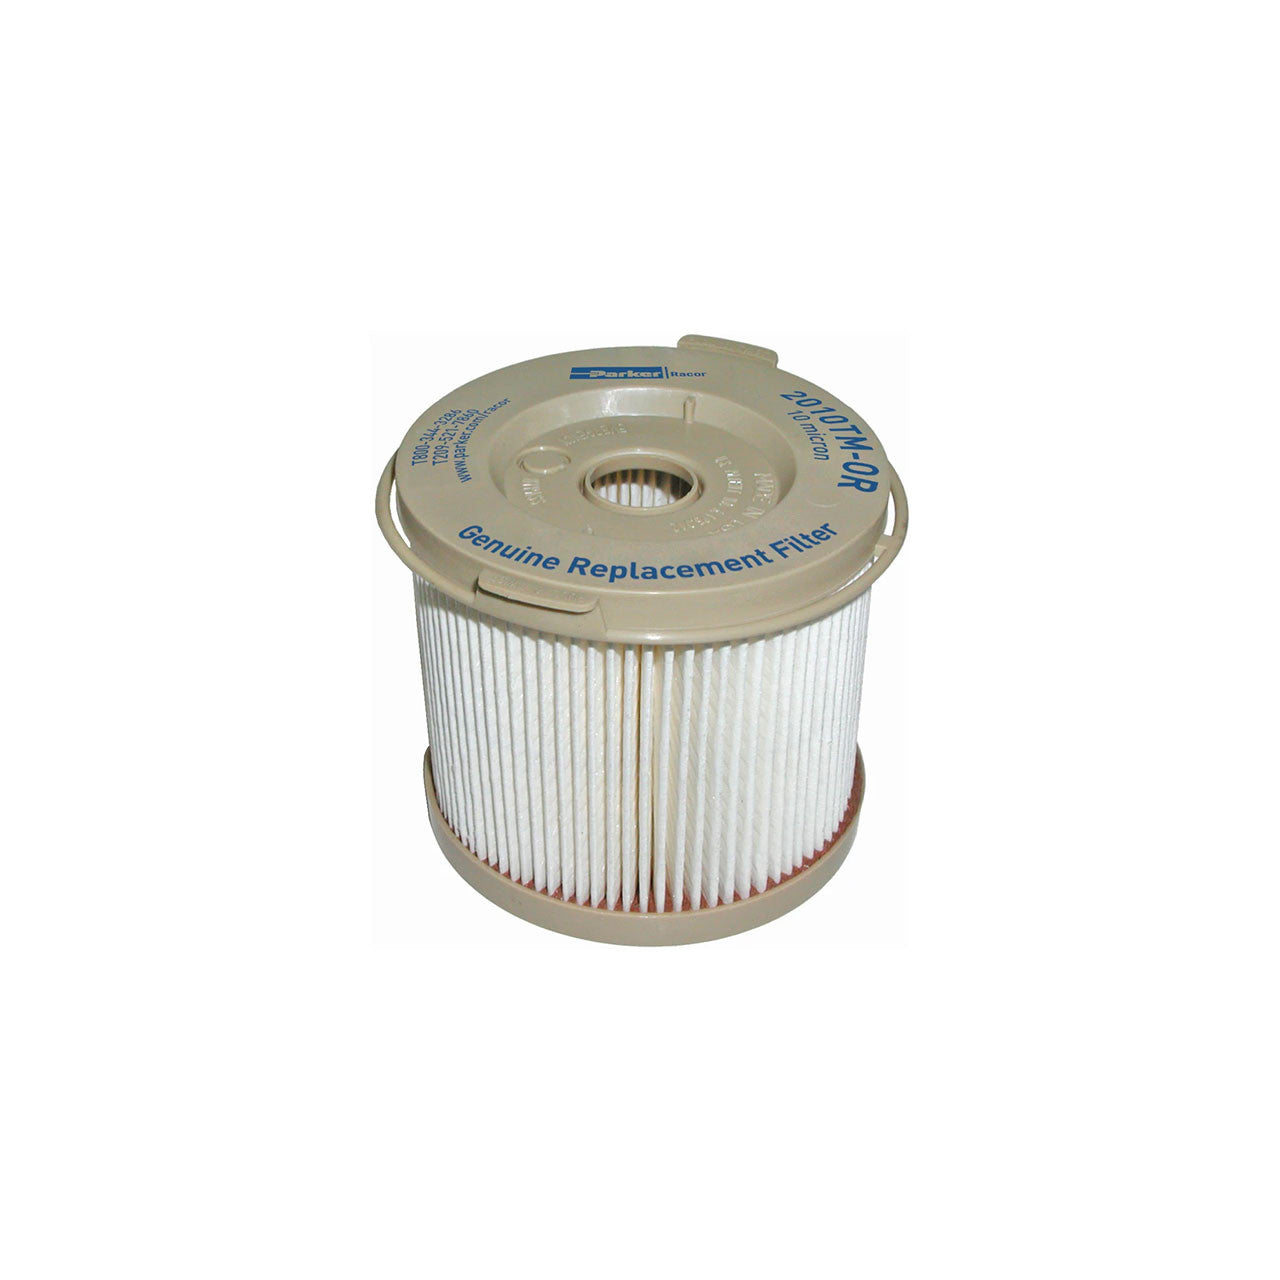 2010N-10 Racor Parker Replacement Filter Element (10 micron) 500 Turbine Series